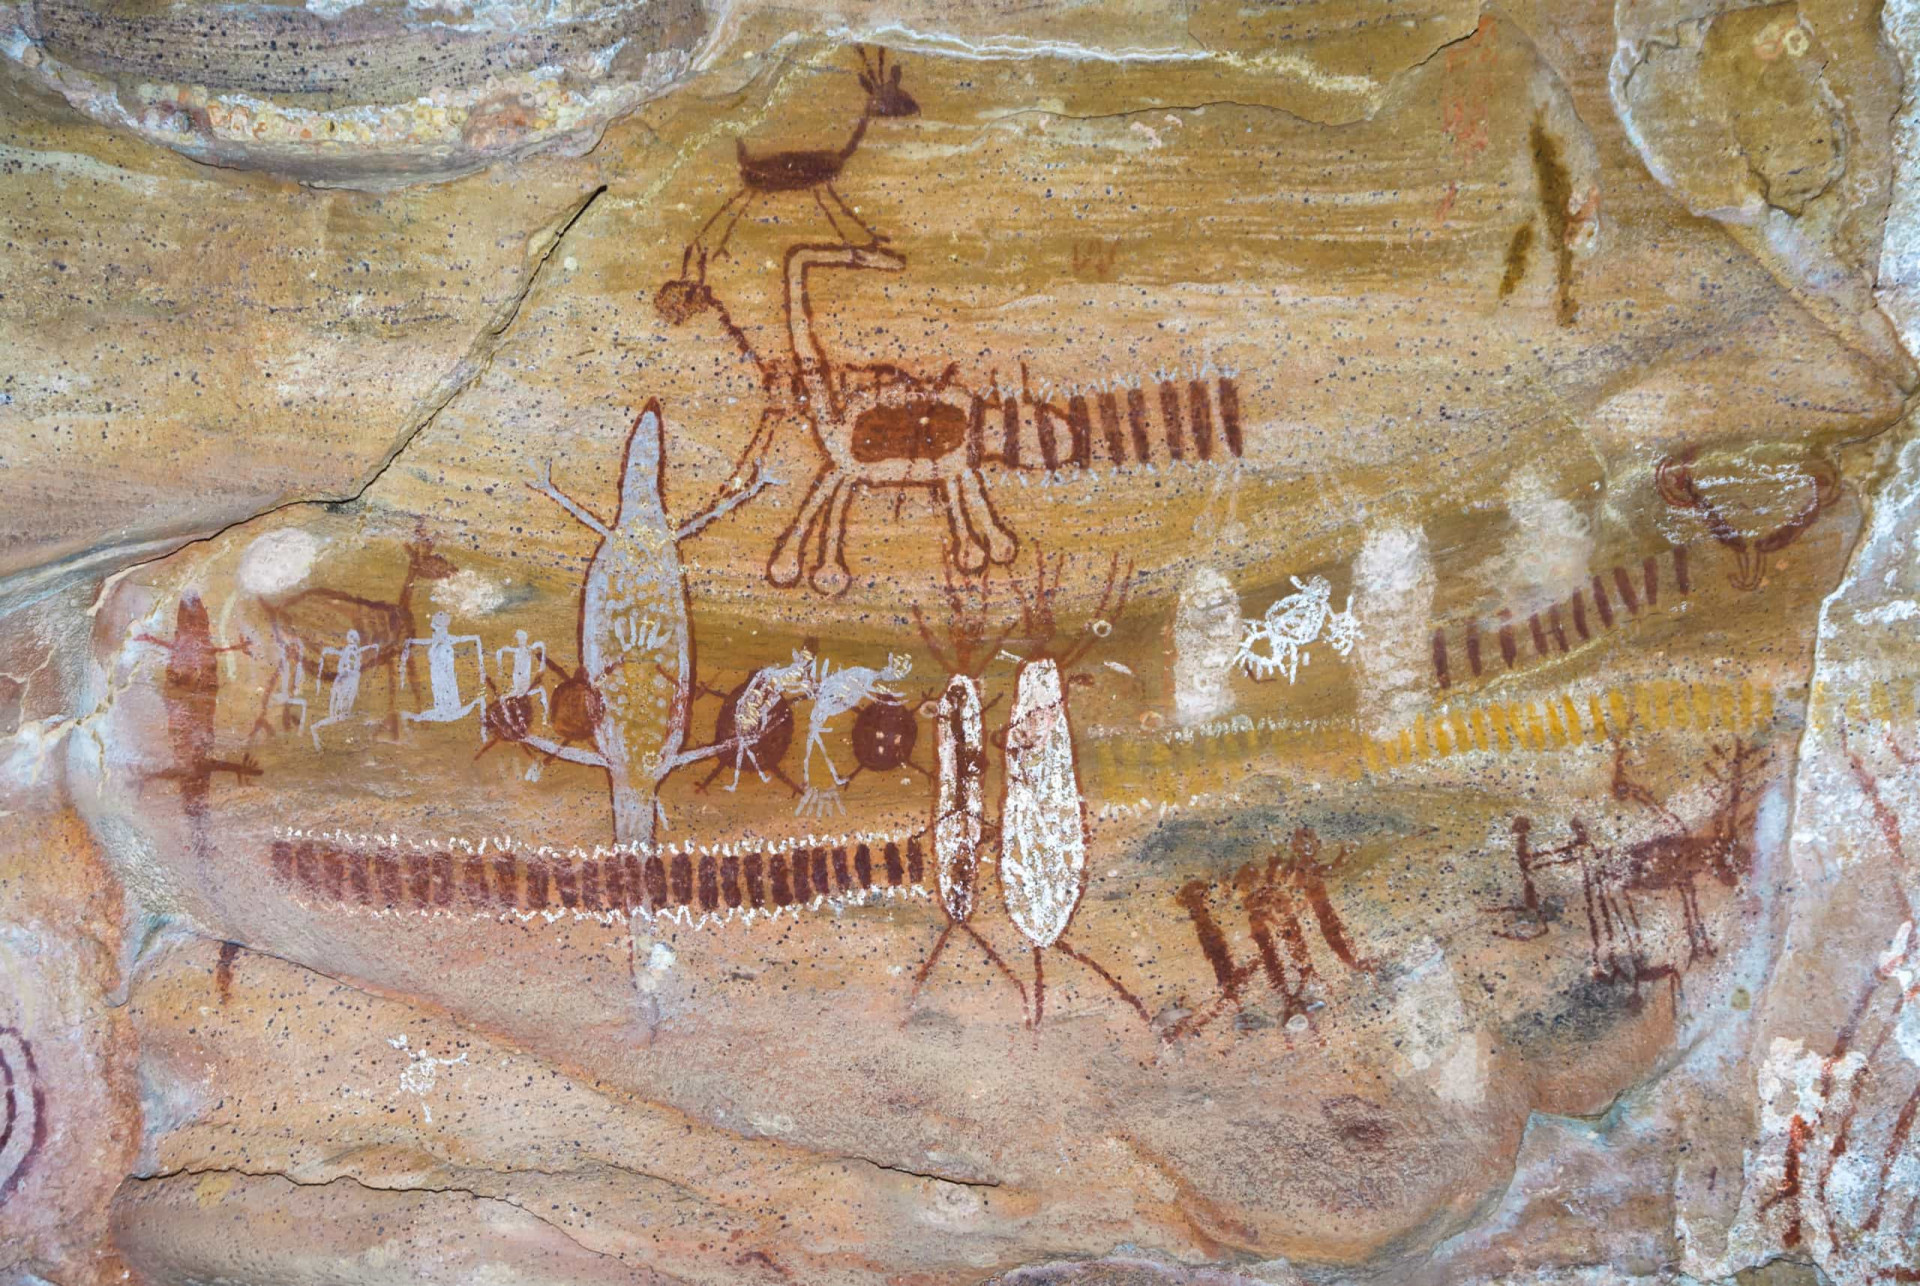 <p>Location: Piauí<br>Criteria: Cultural <br>Year established: 1991<br>Description: The park has the largest and the oldest concentration of prehistoric sites in the Americas. A number of rock shelters found in the area are illustrated with extraordinary examples of cave art and littered with stone tools and other ancient artifacts.</p><p>You may also like:<a href="https://www.starsinsider.com/n/435553?utm_source=msn.com&utm_medium=display&utm_campaign=referral_description&utm_content=413555v12en-us"> Things you think cause cancer (but actually don't) </a></p>